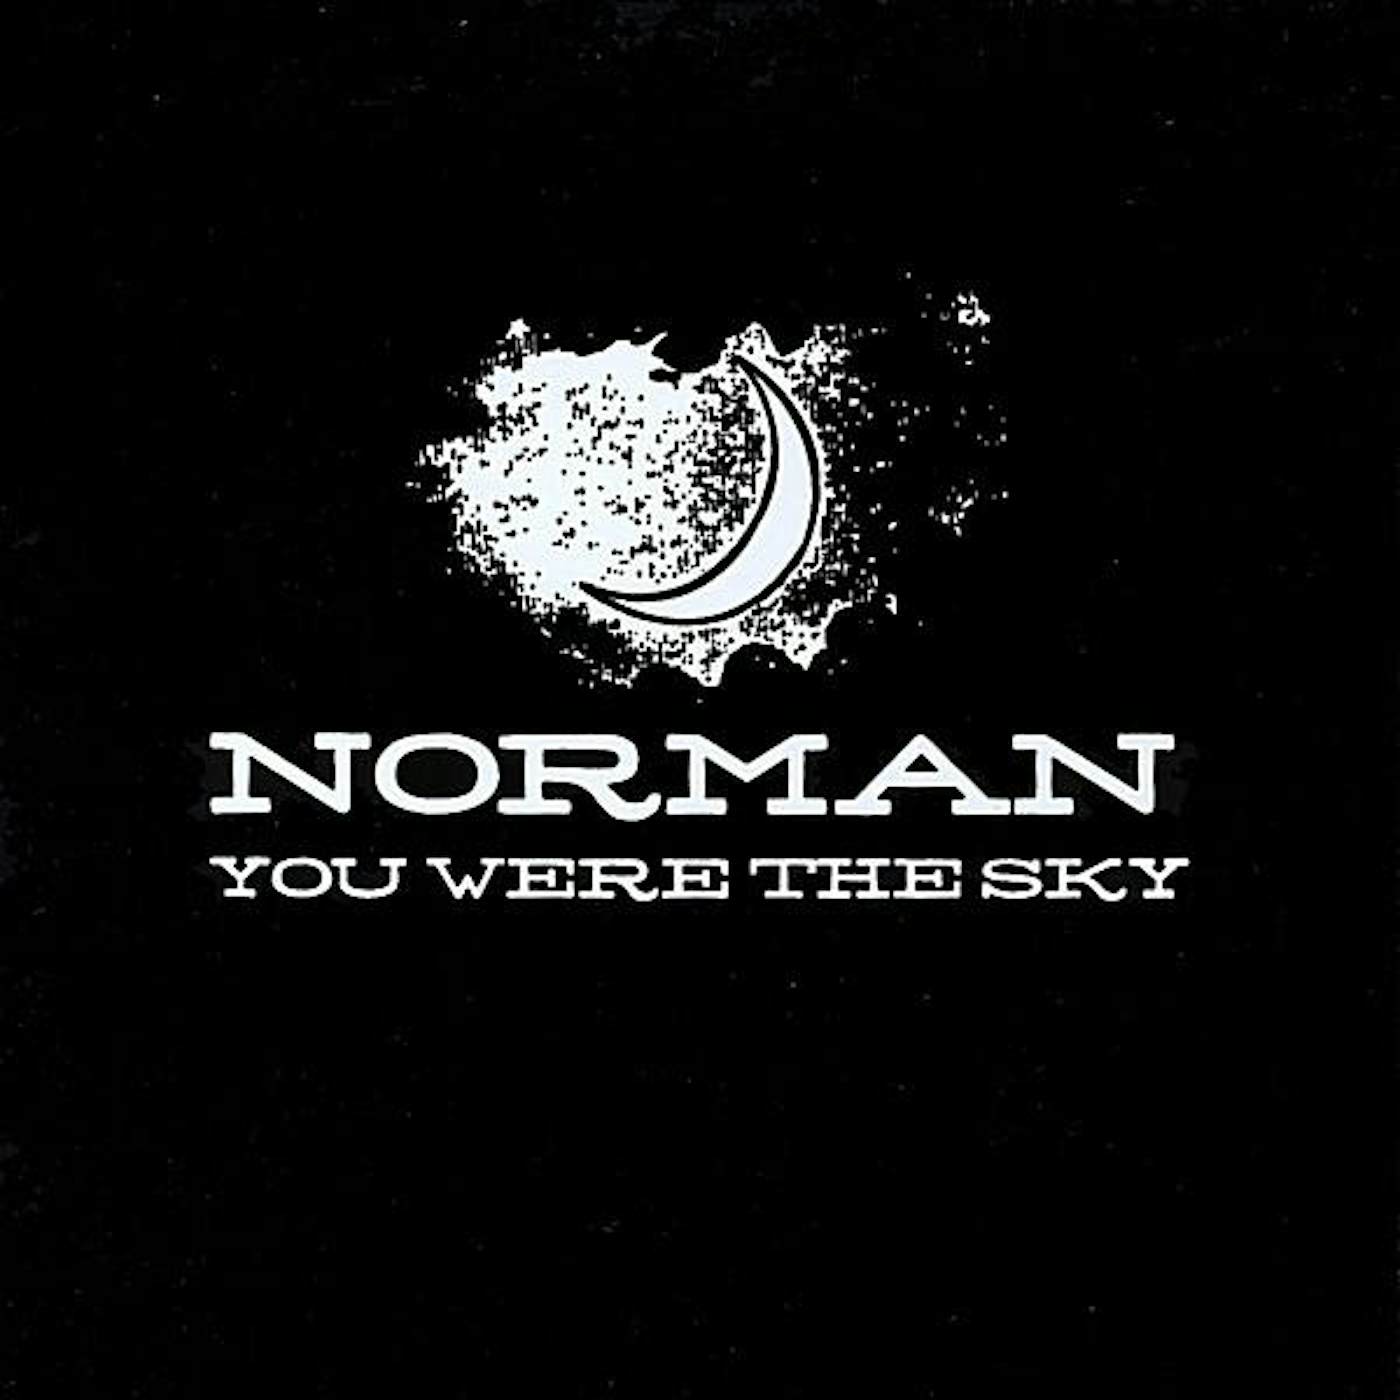 Norman YOU WERE THE SKY CD